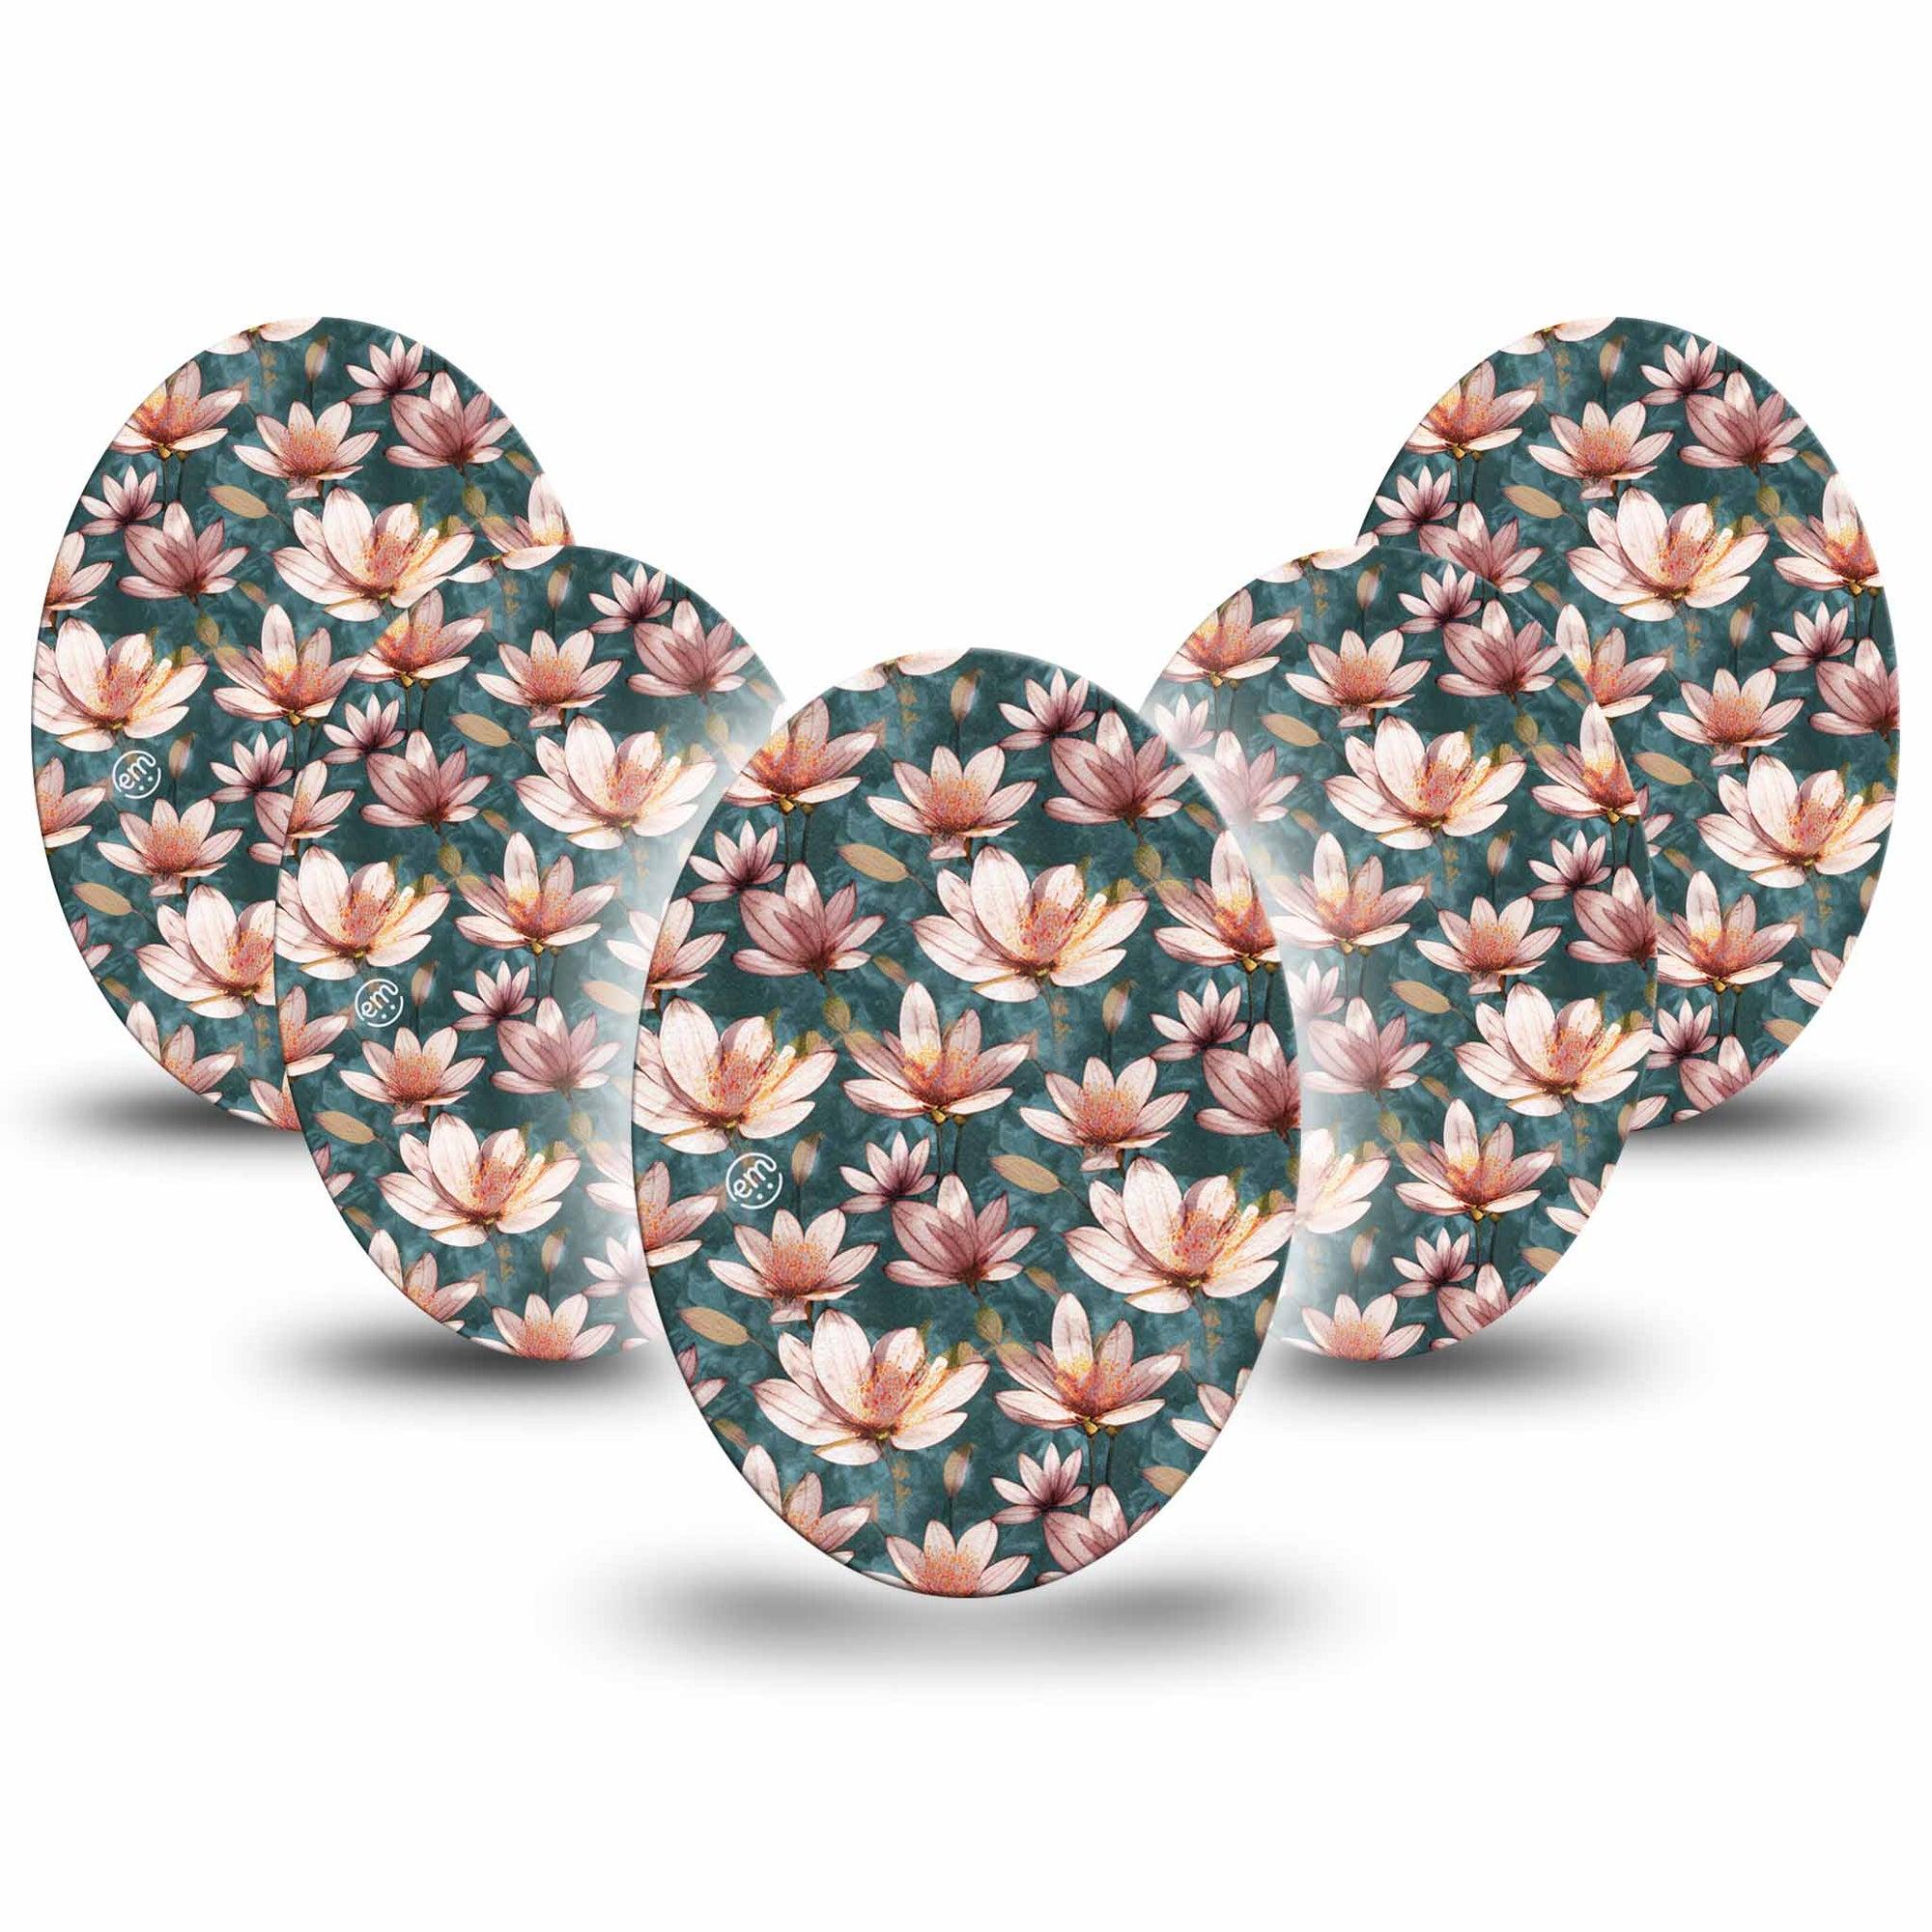 Medtronic Enlite / Guardian ExpressionMed Magnolia Universal Oval Tape, 5-Pack, Sweet-Scented Florals Inspired, Medtronic Plaster Patch Design